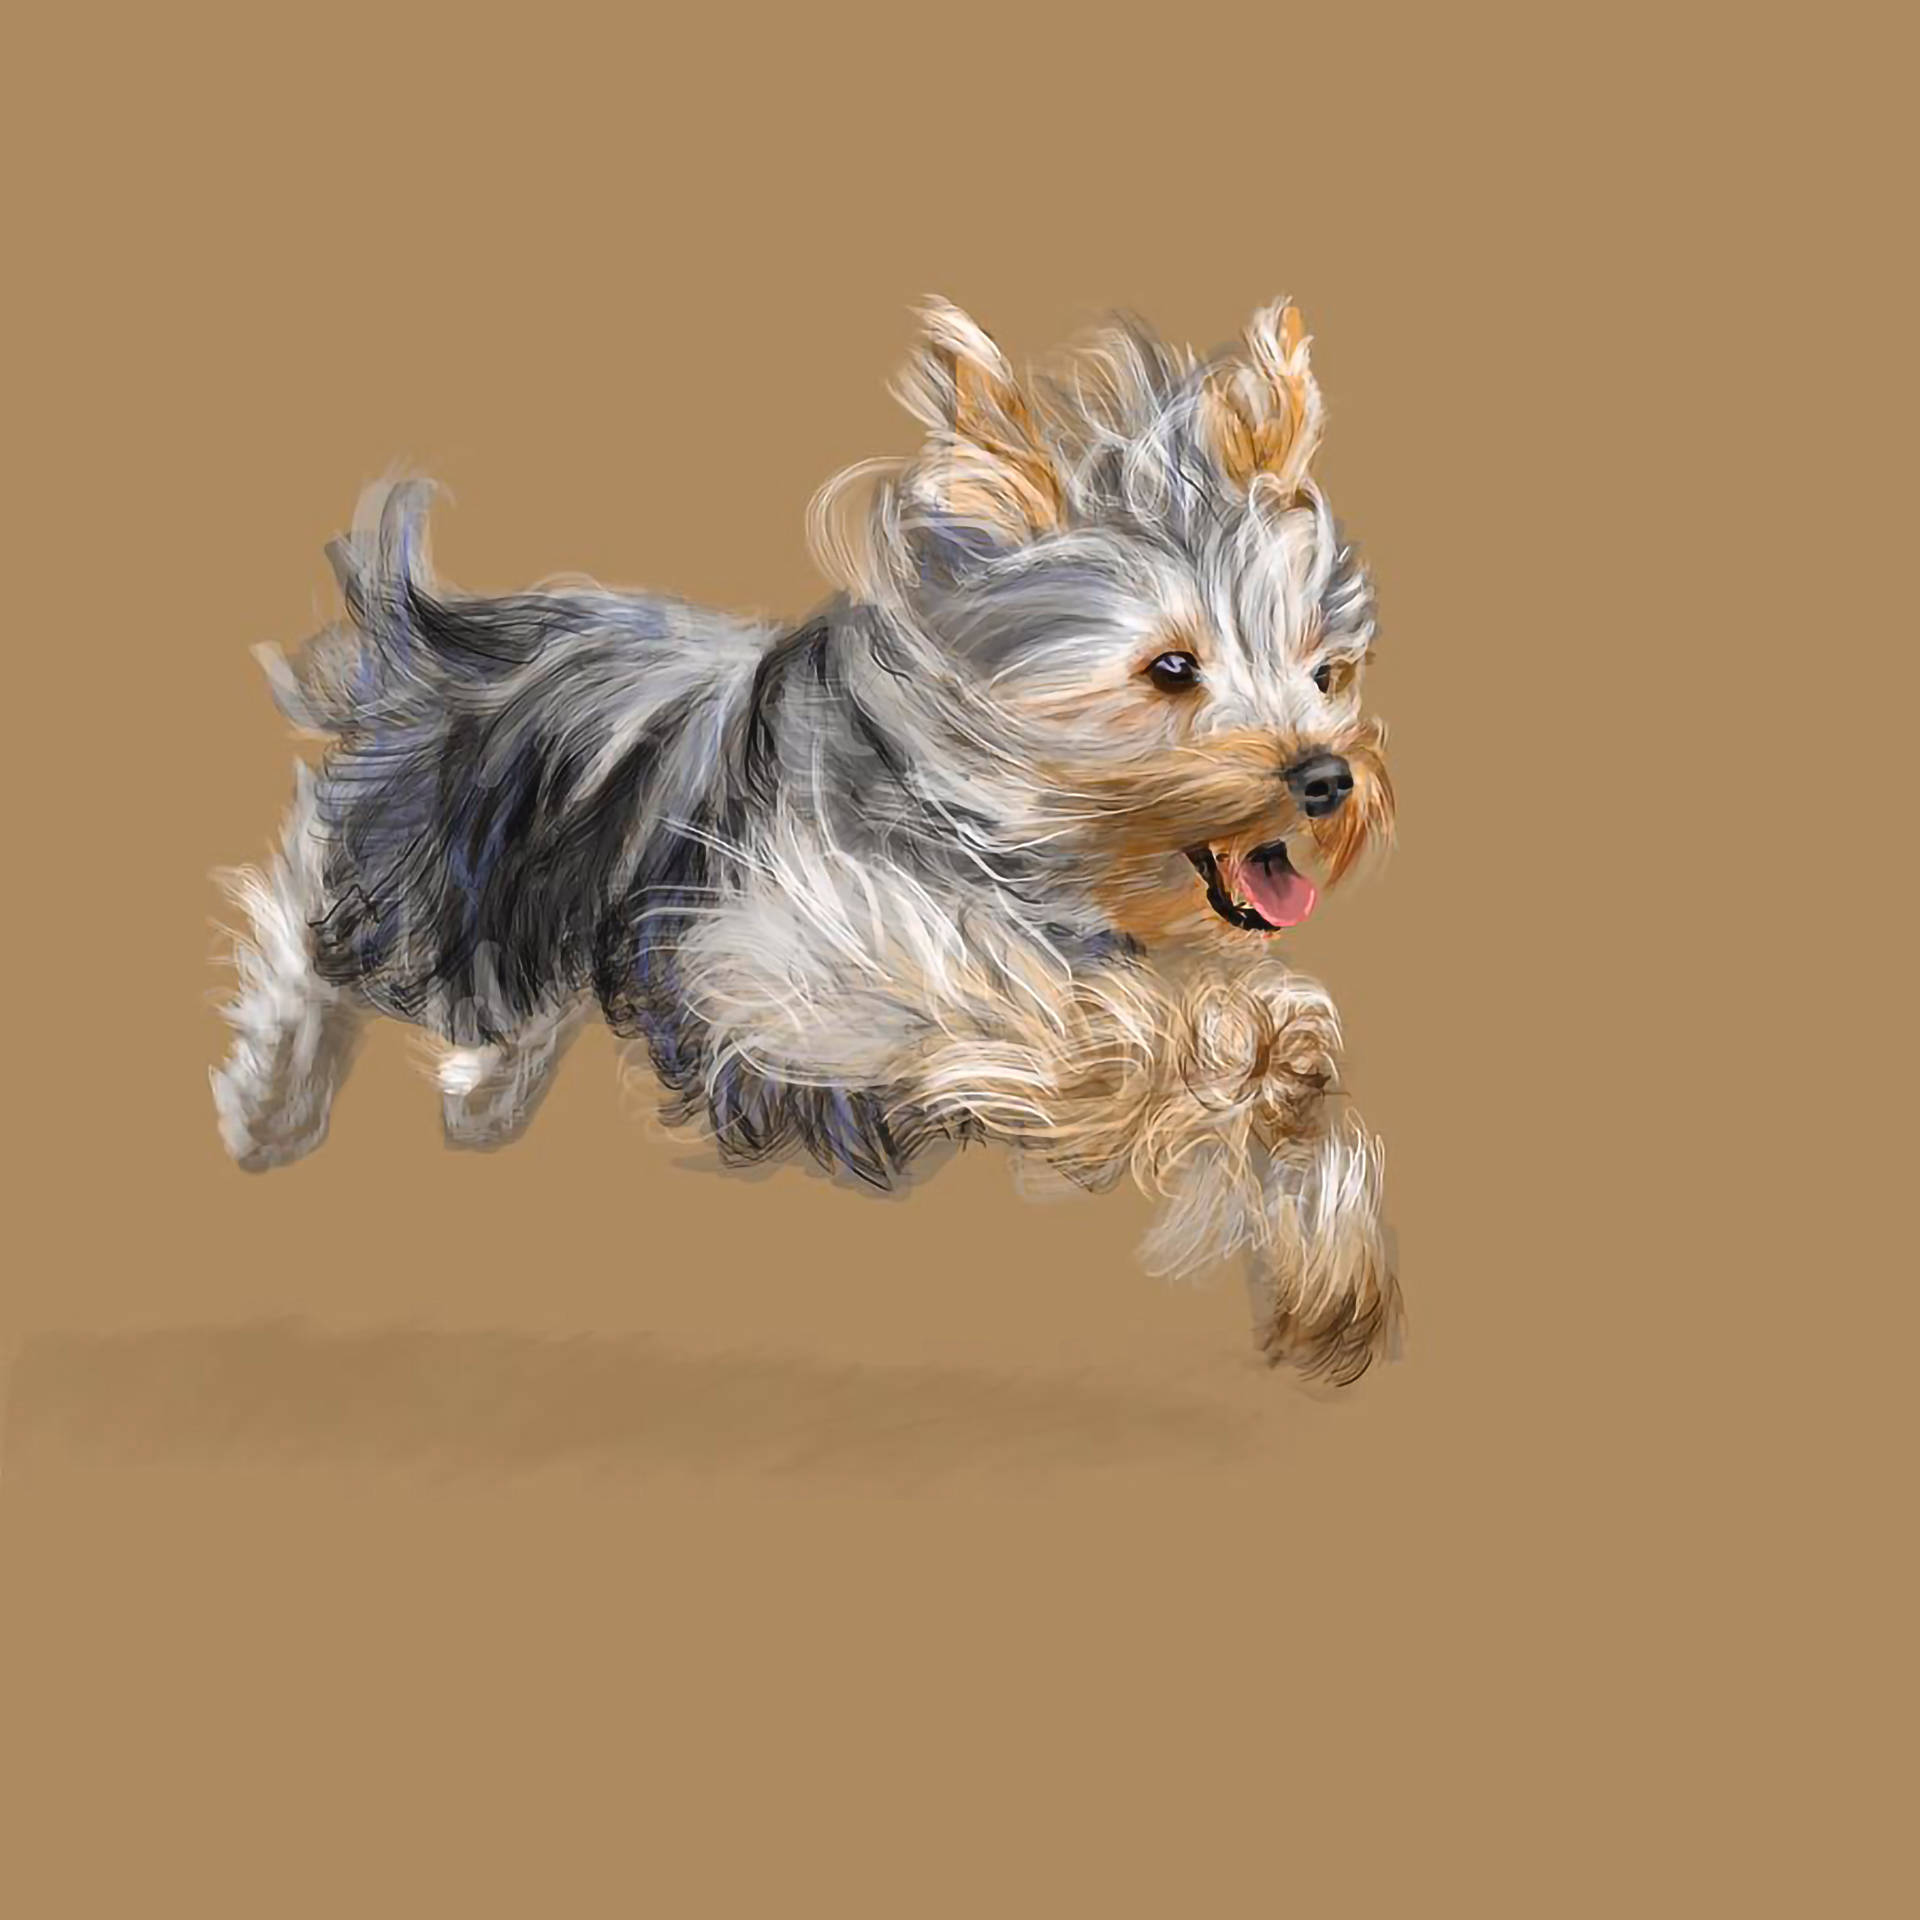 Yorkie Puppy Mid-jump Painting Wallpaper